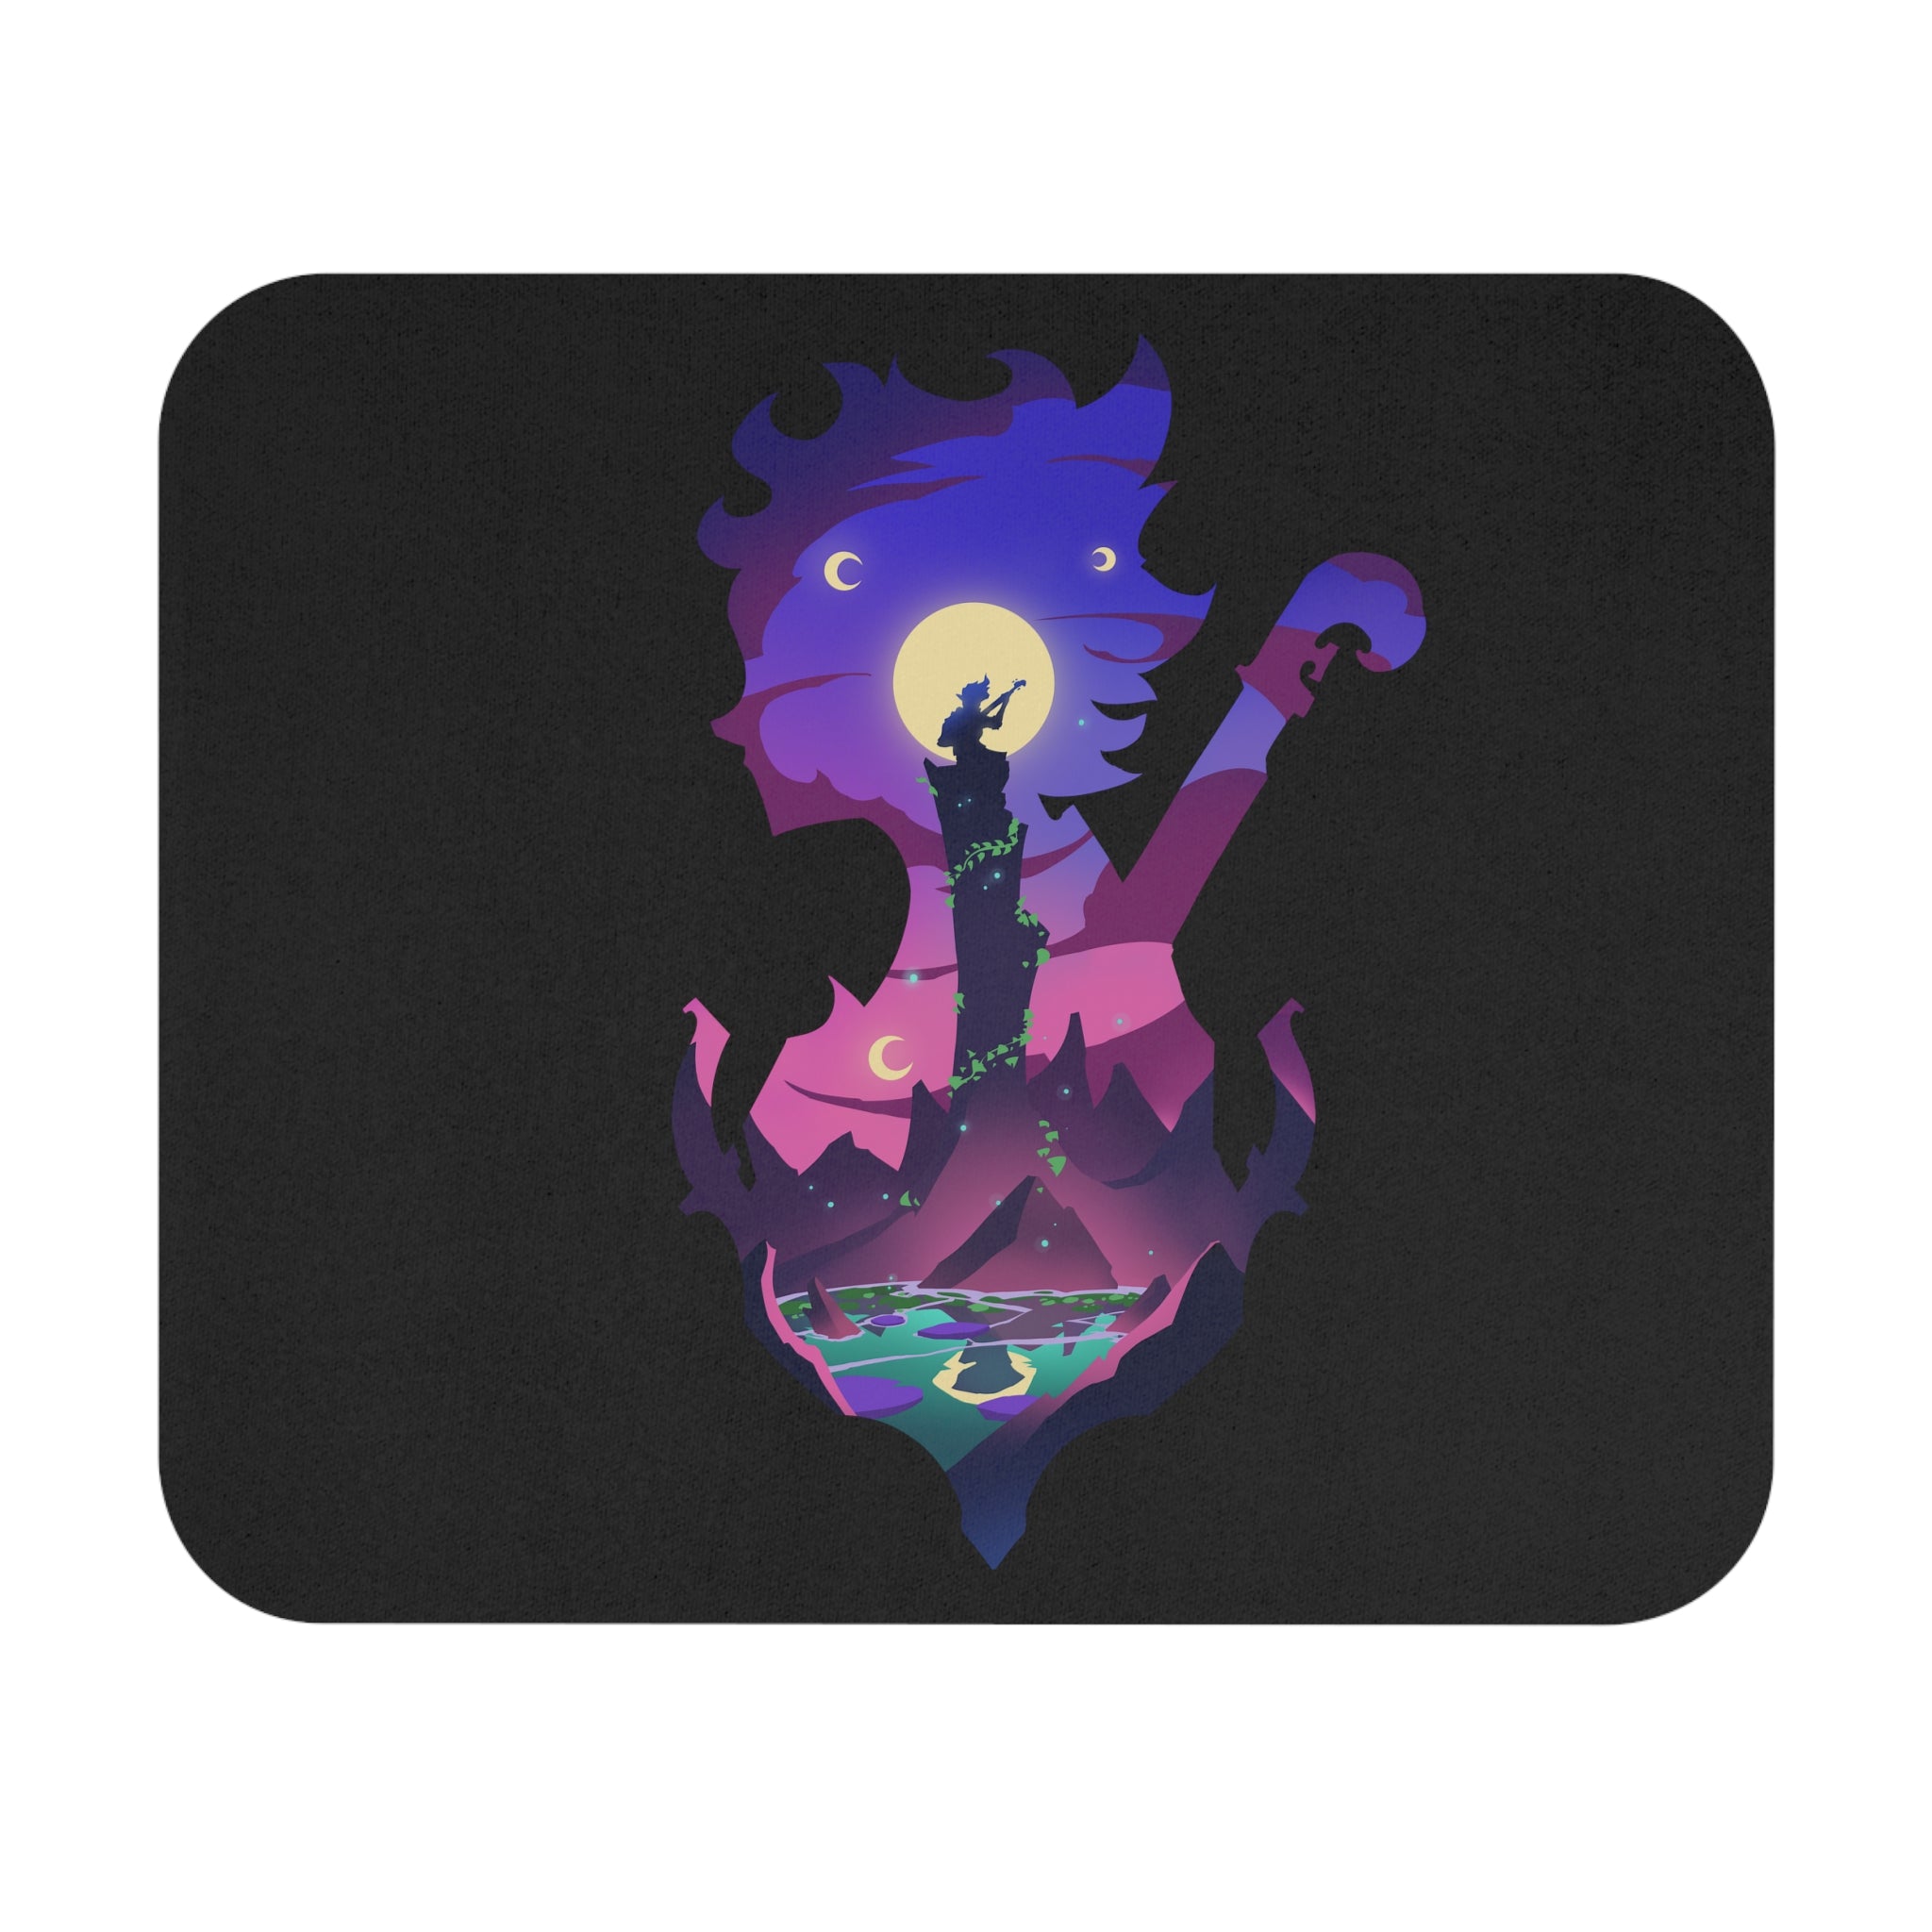 BARD CLASS SILHOUETTE RECTANGLER MOUSE PAD